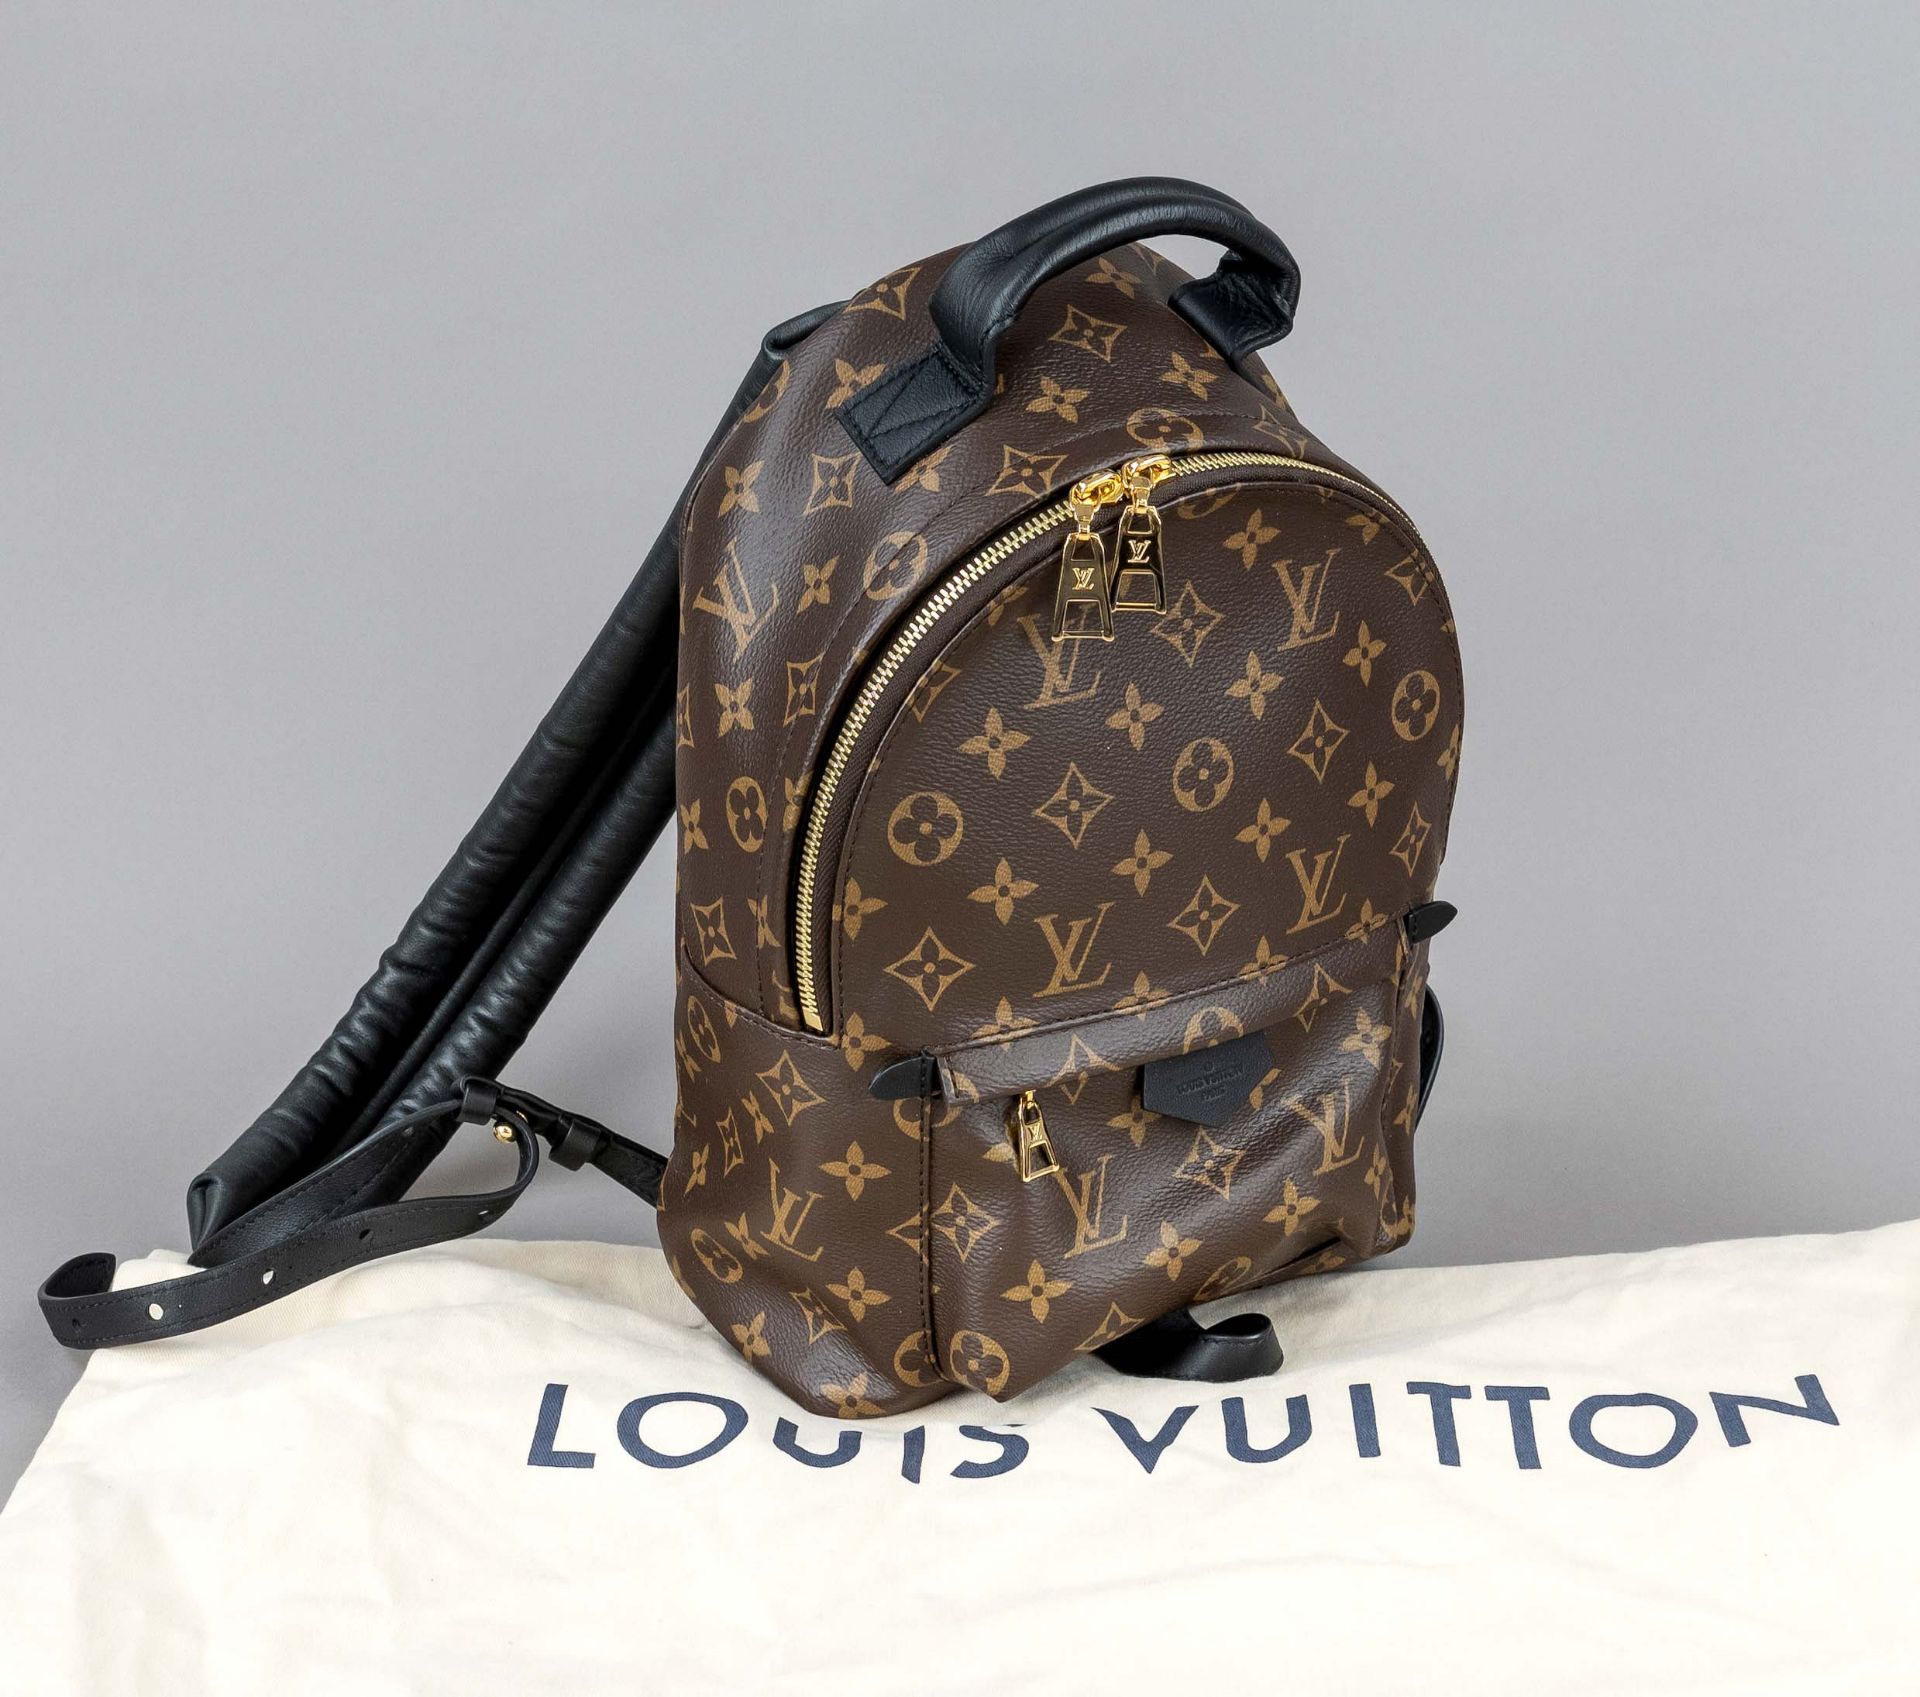 Louis Vuitton, Palm Springs PM Monogram Canvas Backpack, rubberized cotton canvas in classic logo